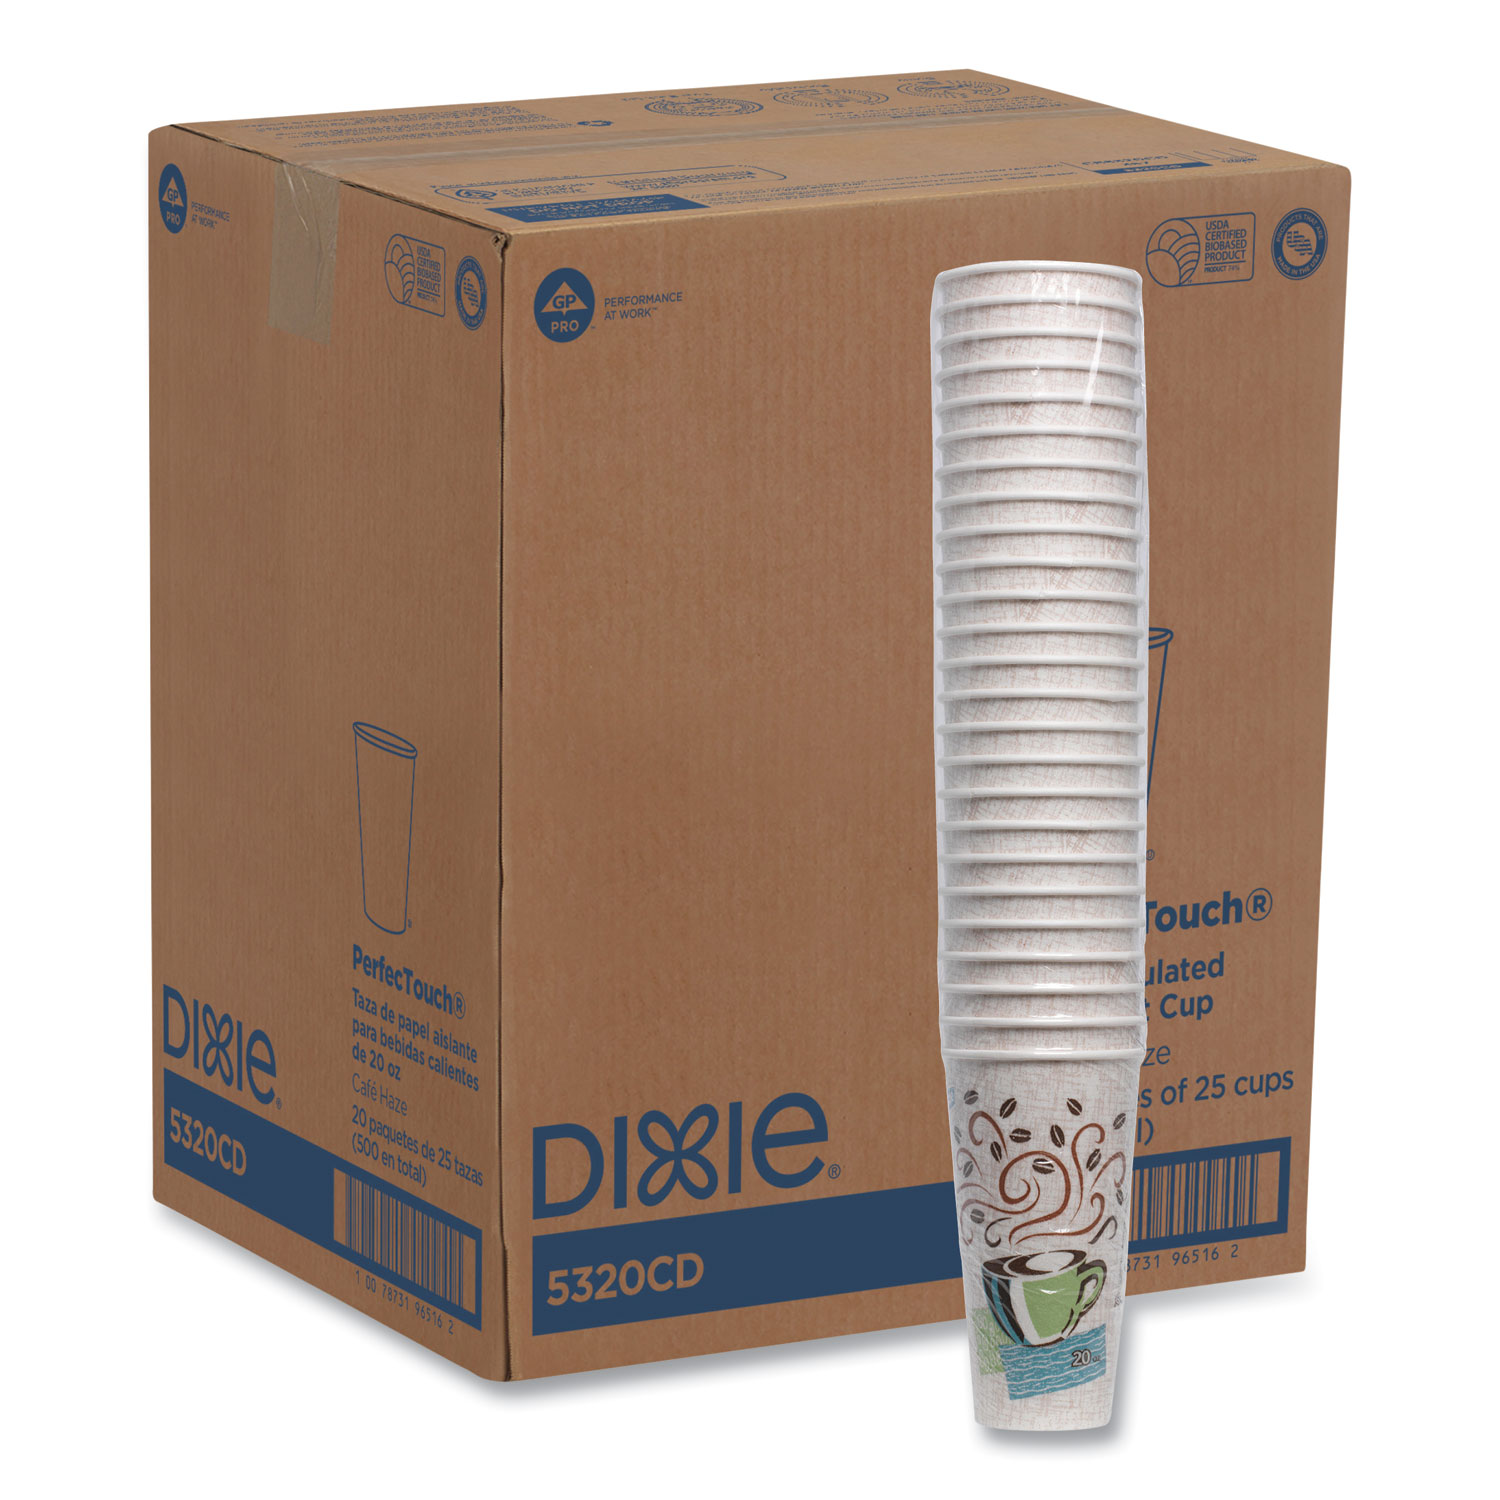 Dixie PerfecTouch Coffee Hot Cups, 16 oz - 50 count